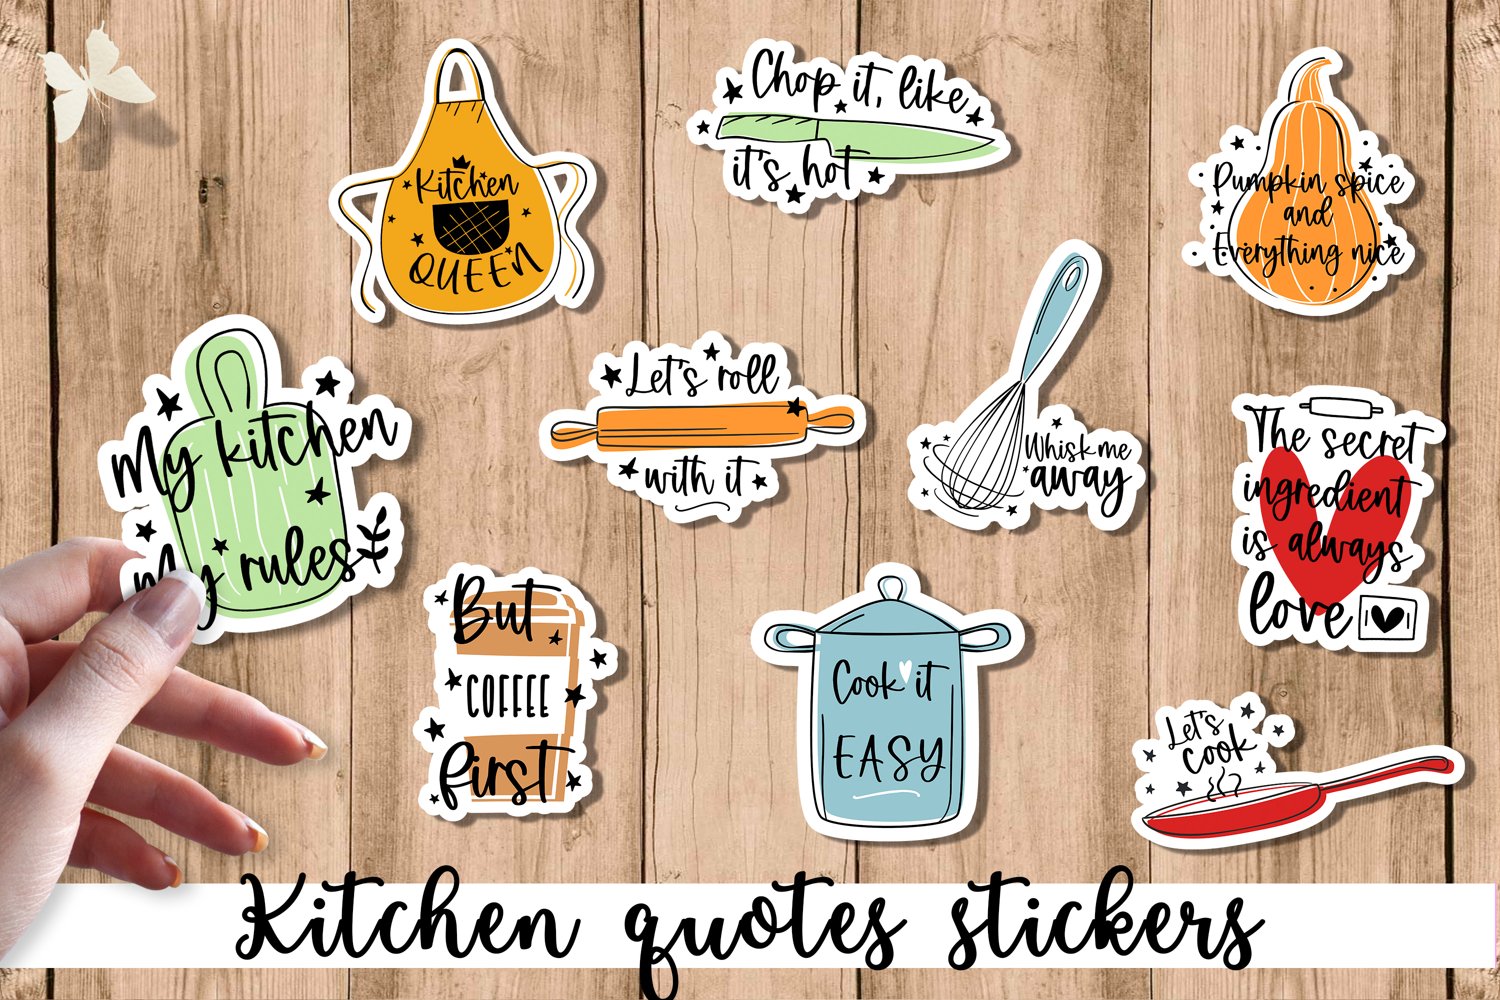 Kitchen quotes stickers.